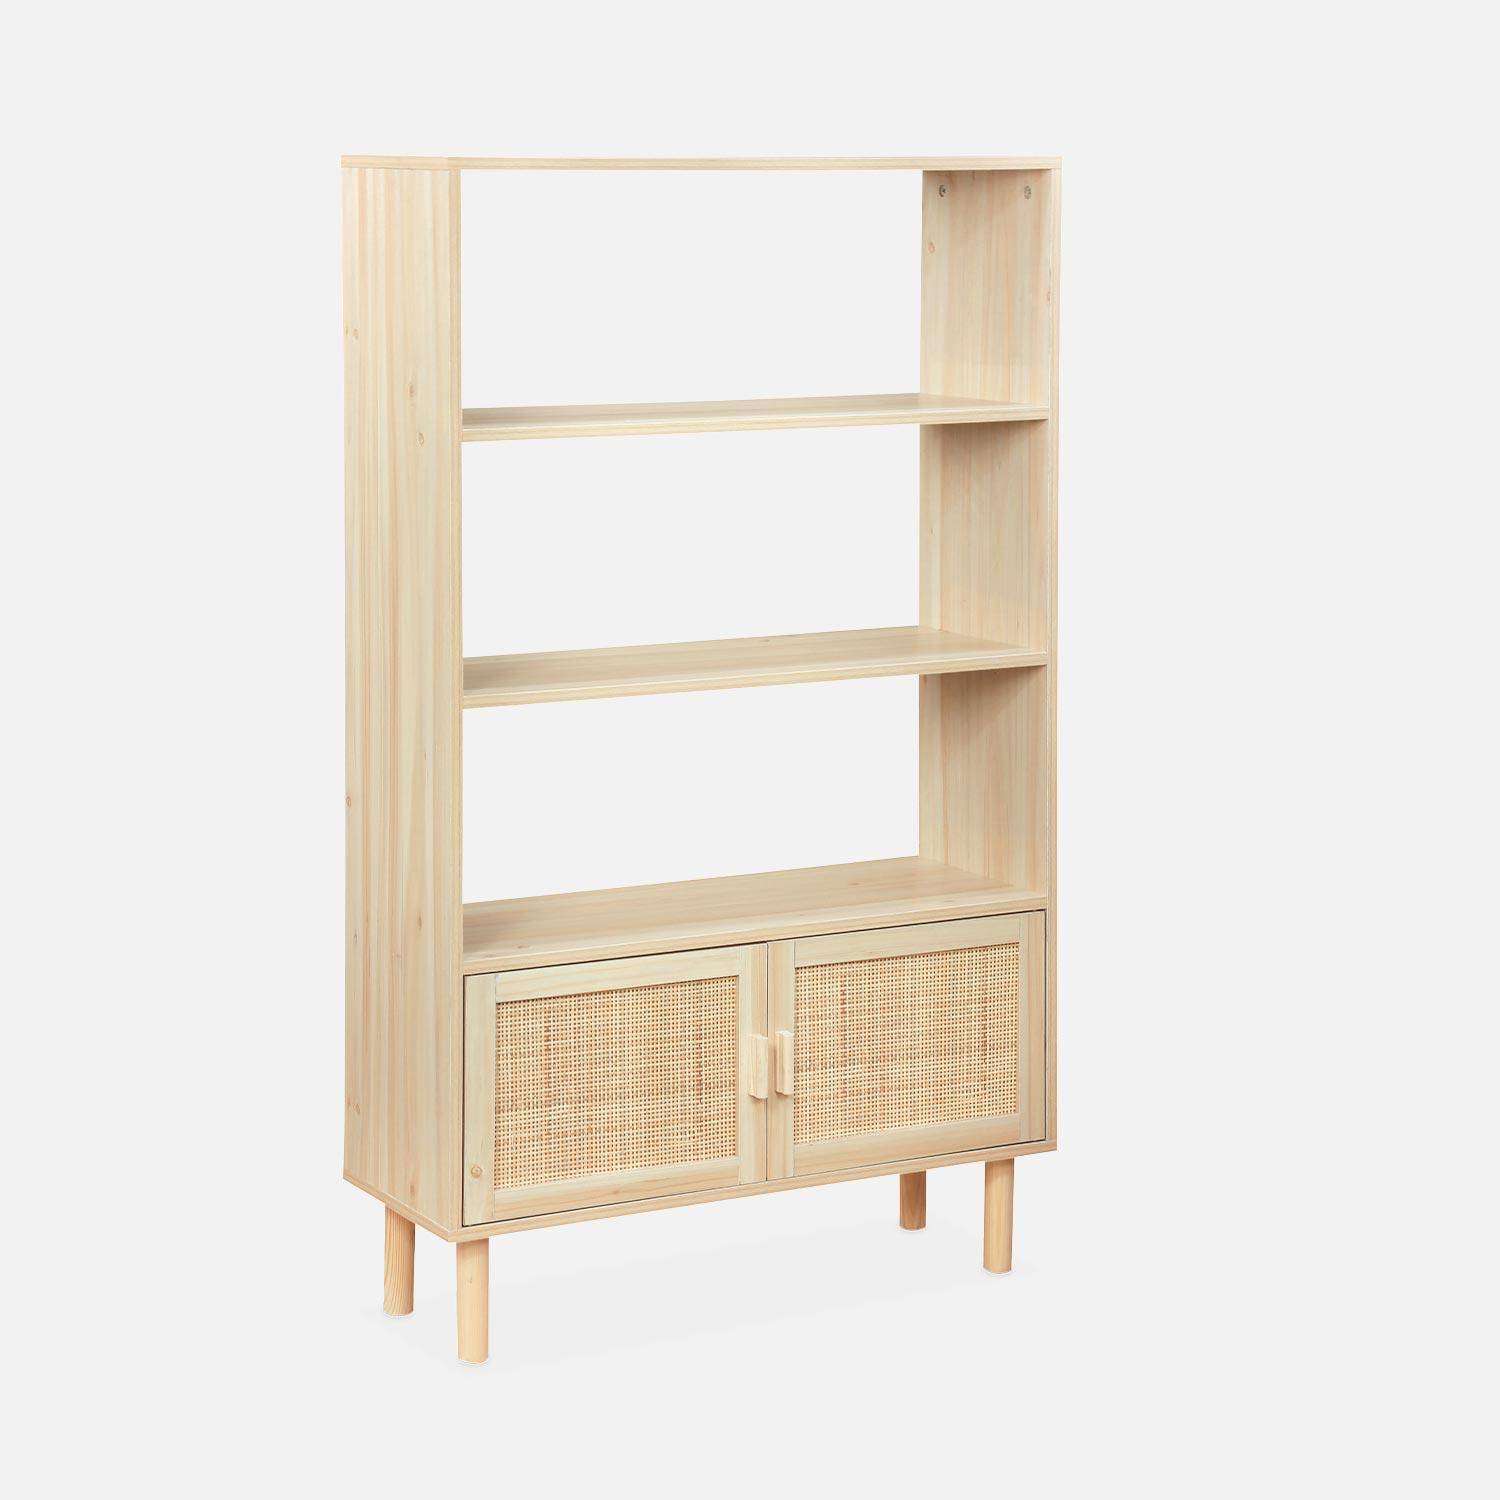 Woven rattan bookcase with storage cupboard, 3 shelves, 2 doors, 80x30x140cm - Camargue - Natural Photo3